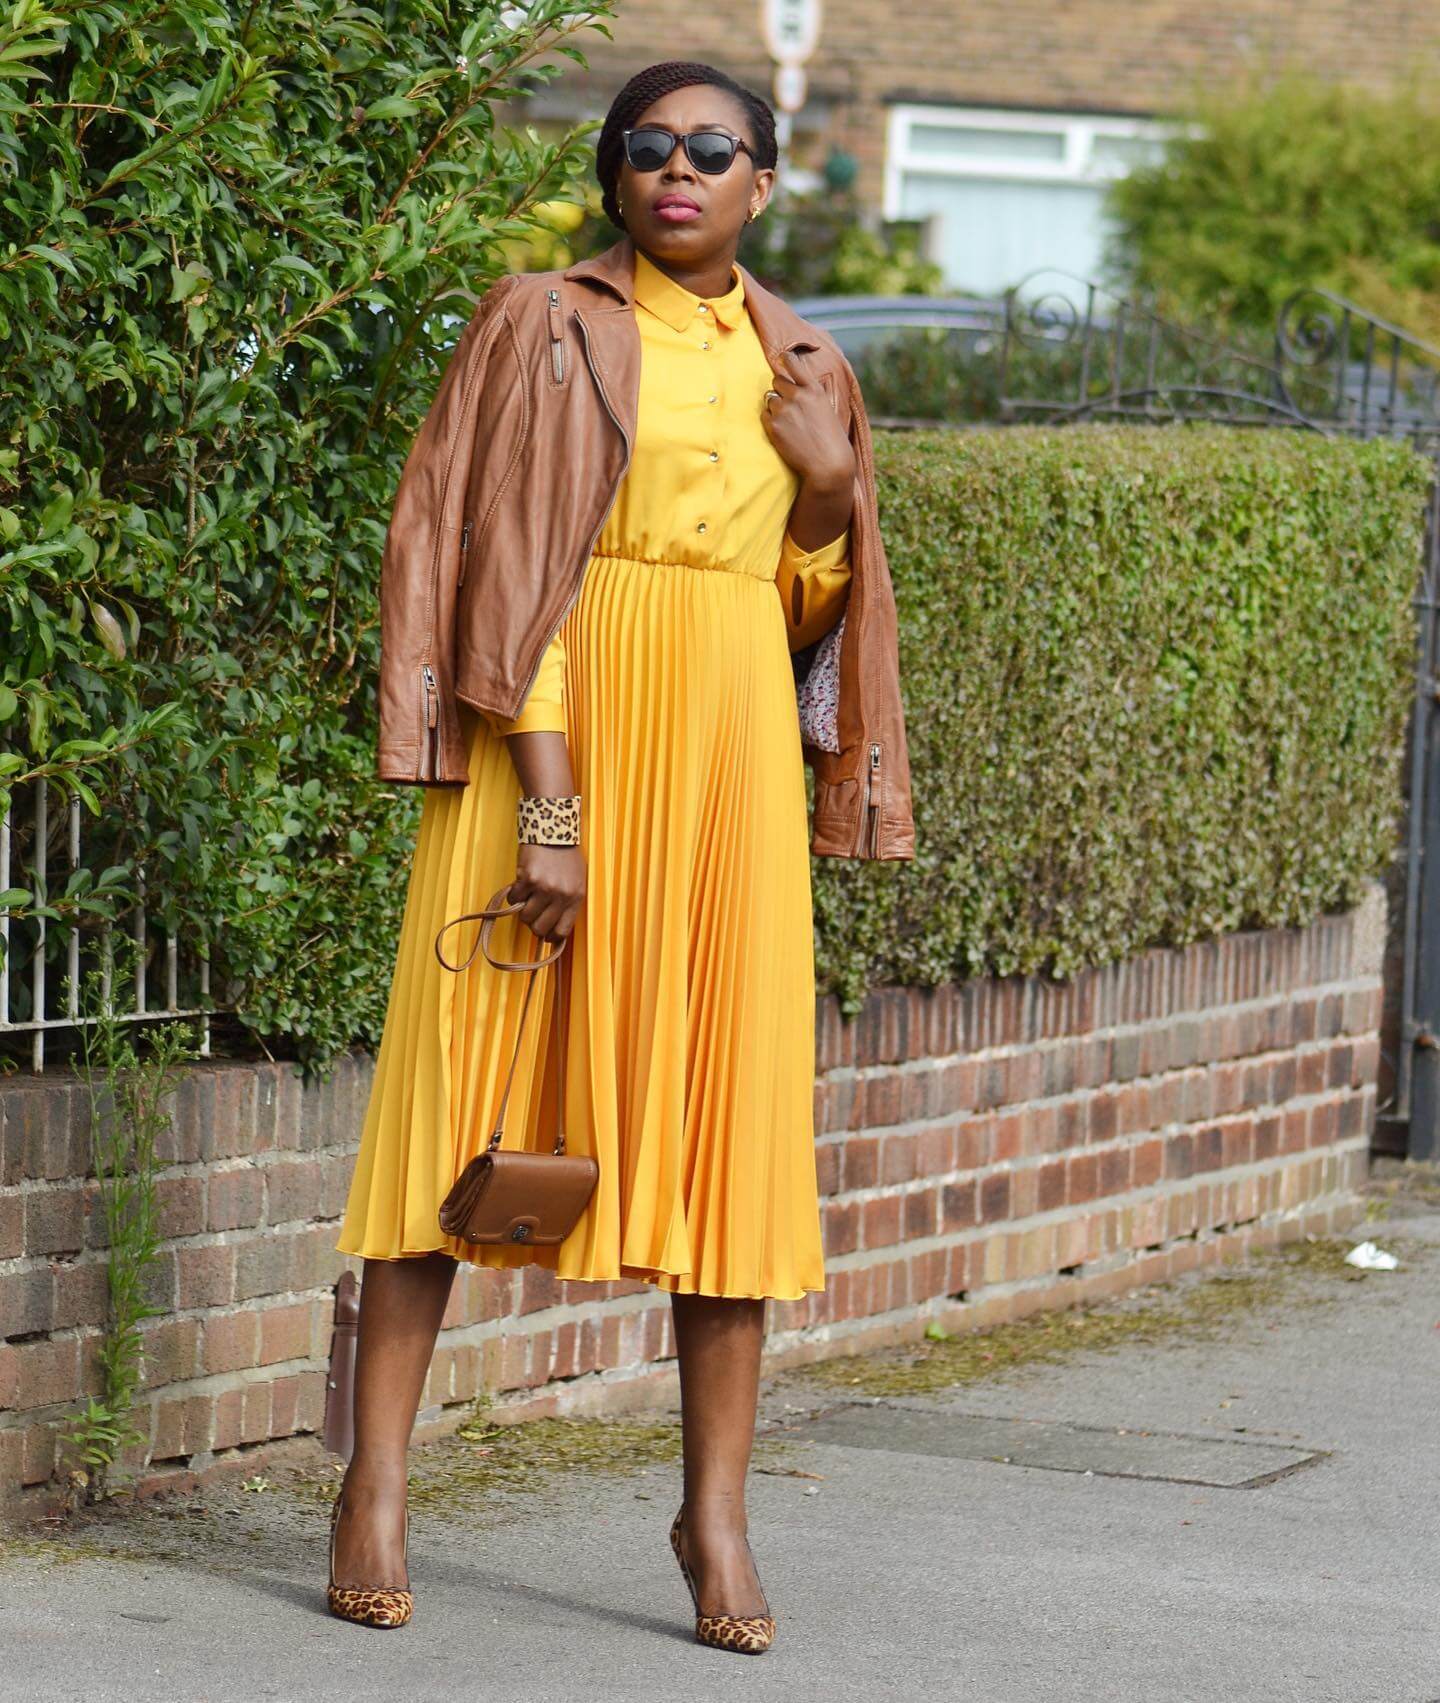 Jacket to Wear with a Yellow Dress